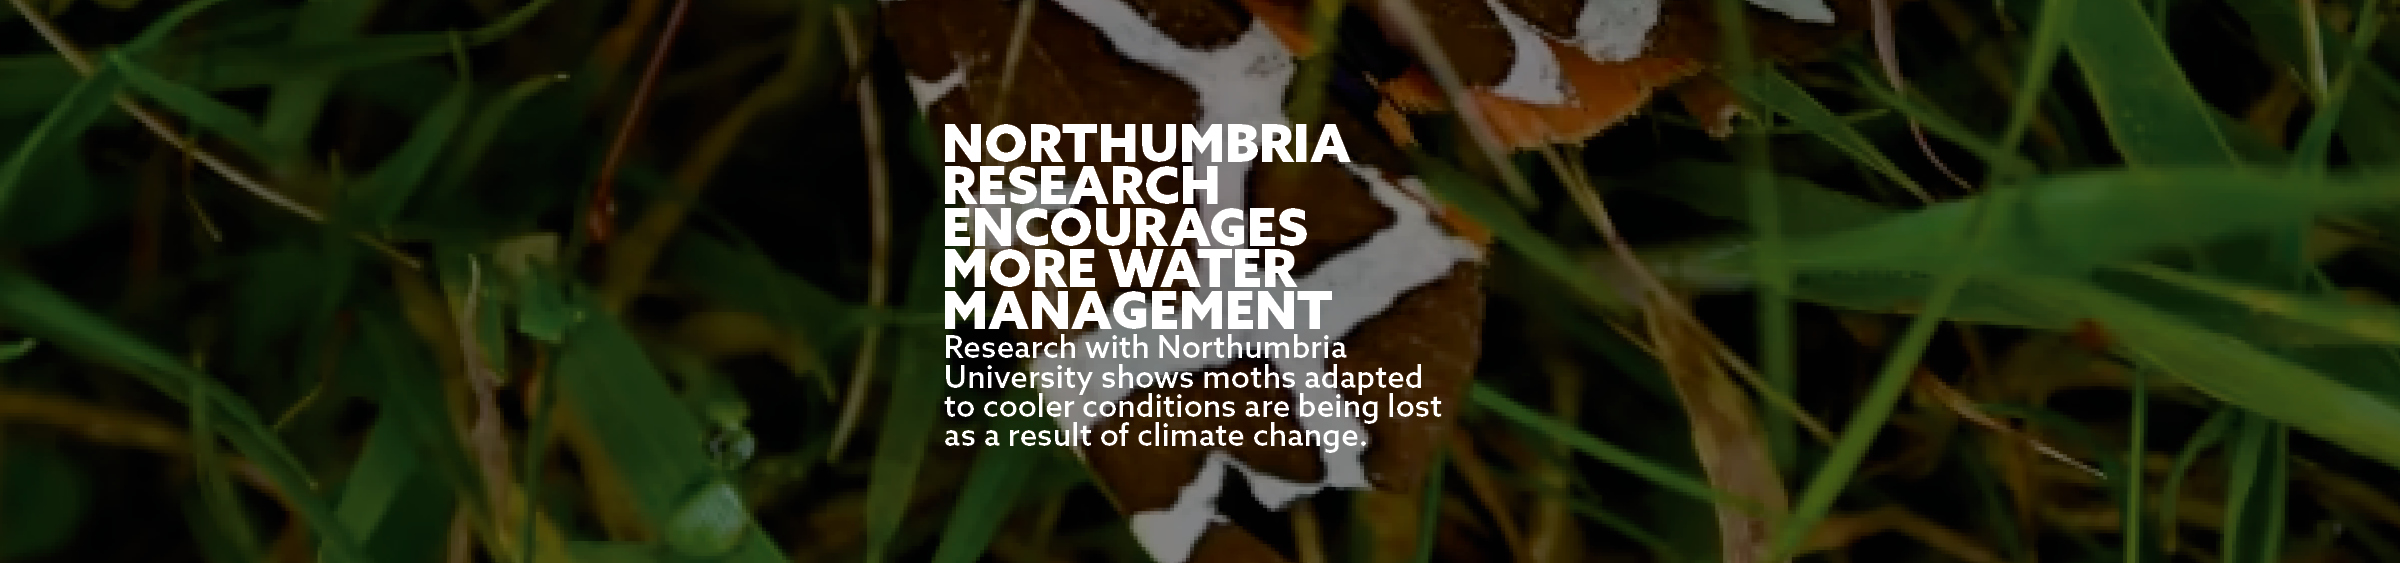 Northumbria research encourages more water management